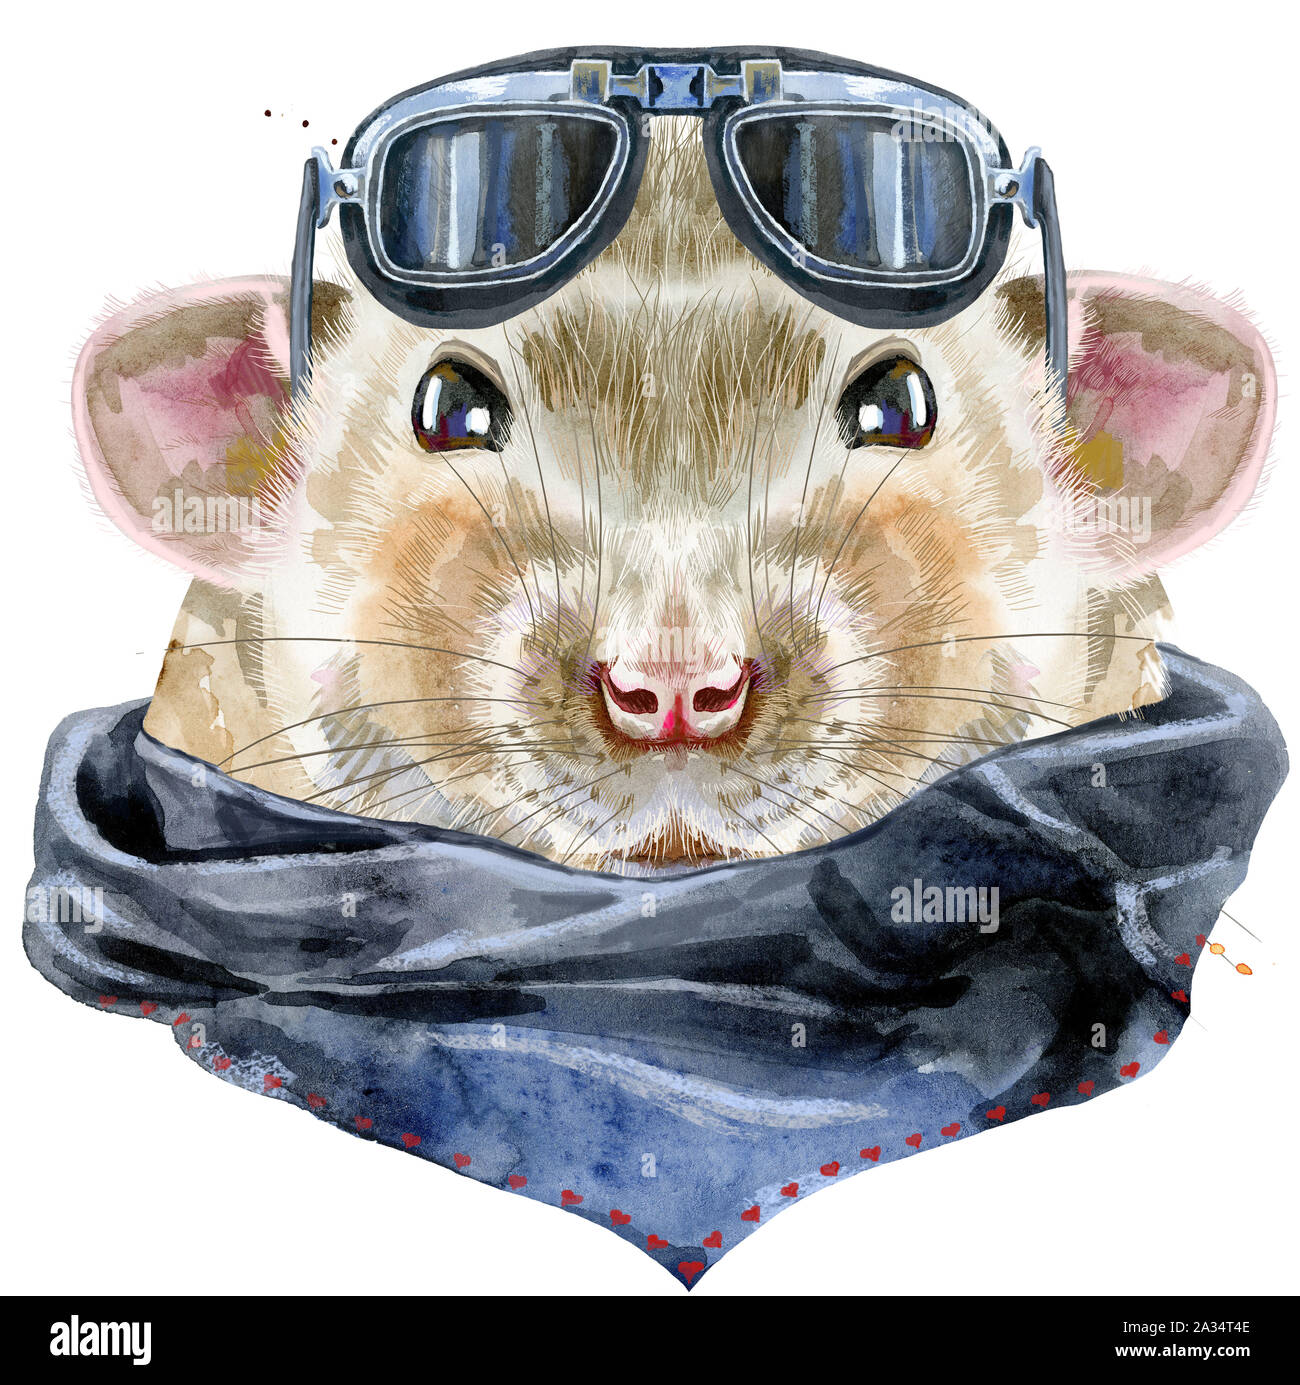 Cute rat with biker sunglasses and splashes for t-shirt graphics. Watercolor rat illustration Stock Photo